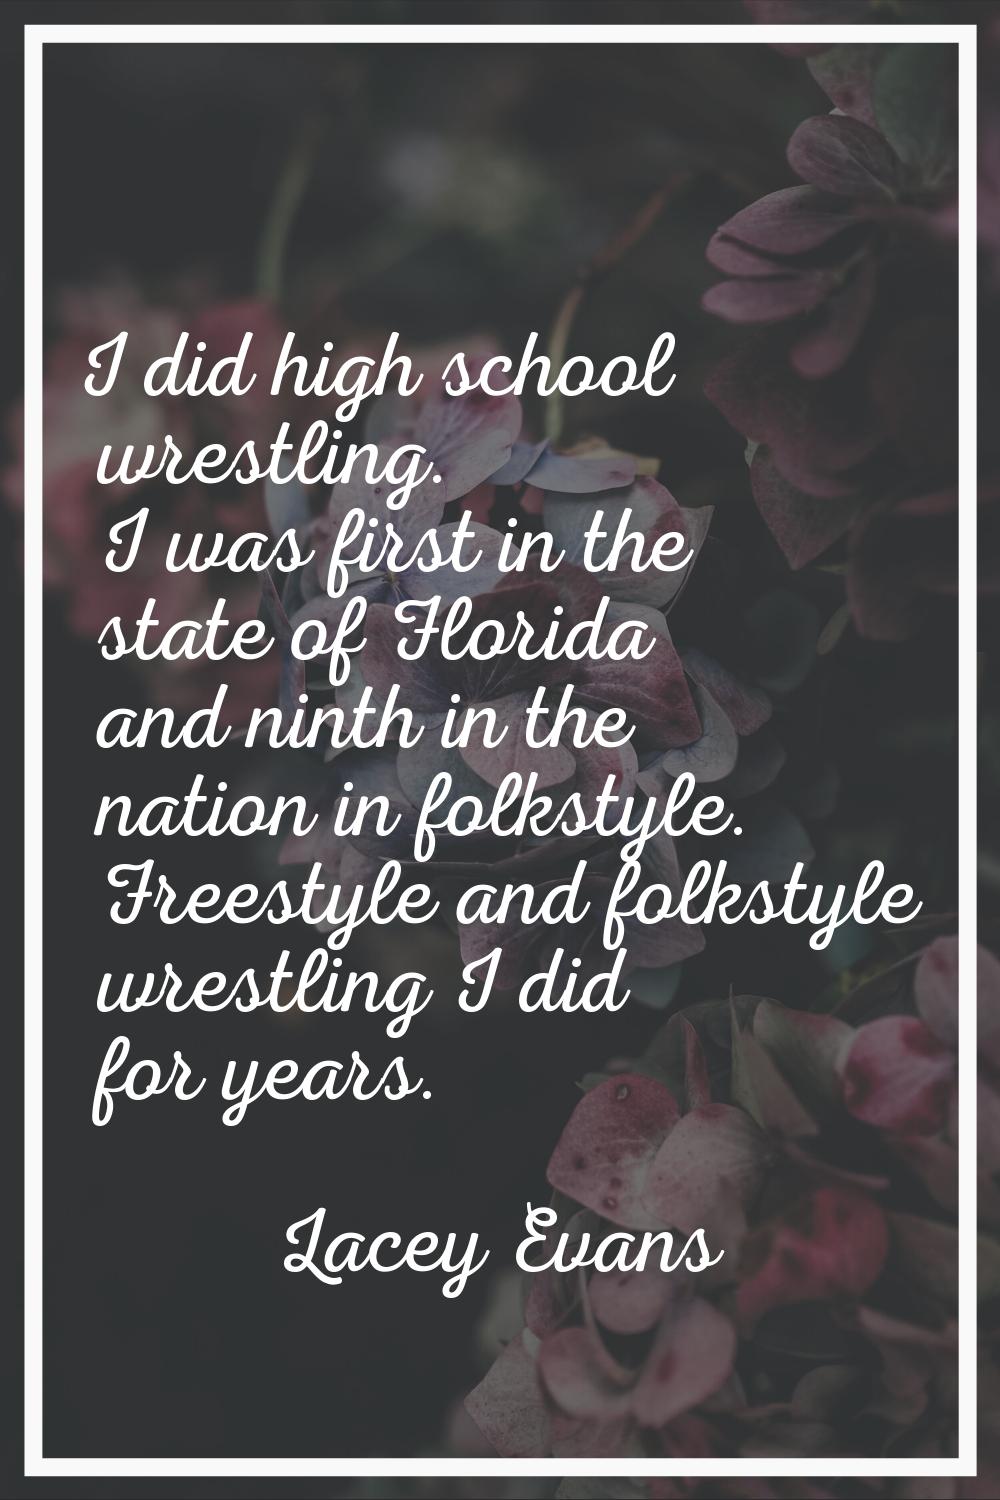 I did high school wrestling. I was first in the state of Florida and ninth in the nation in folksty